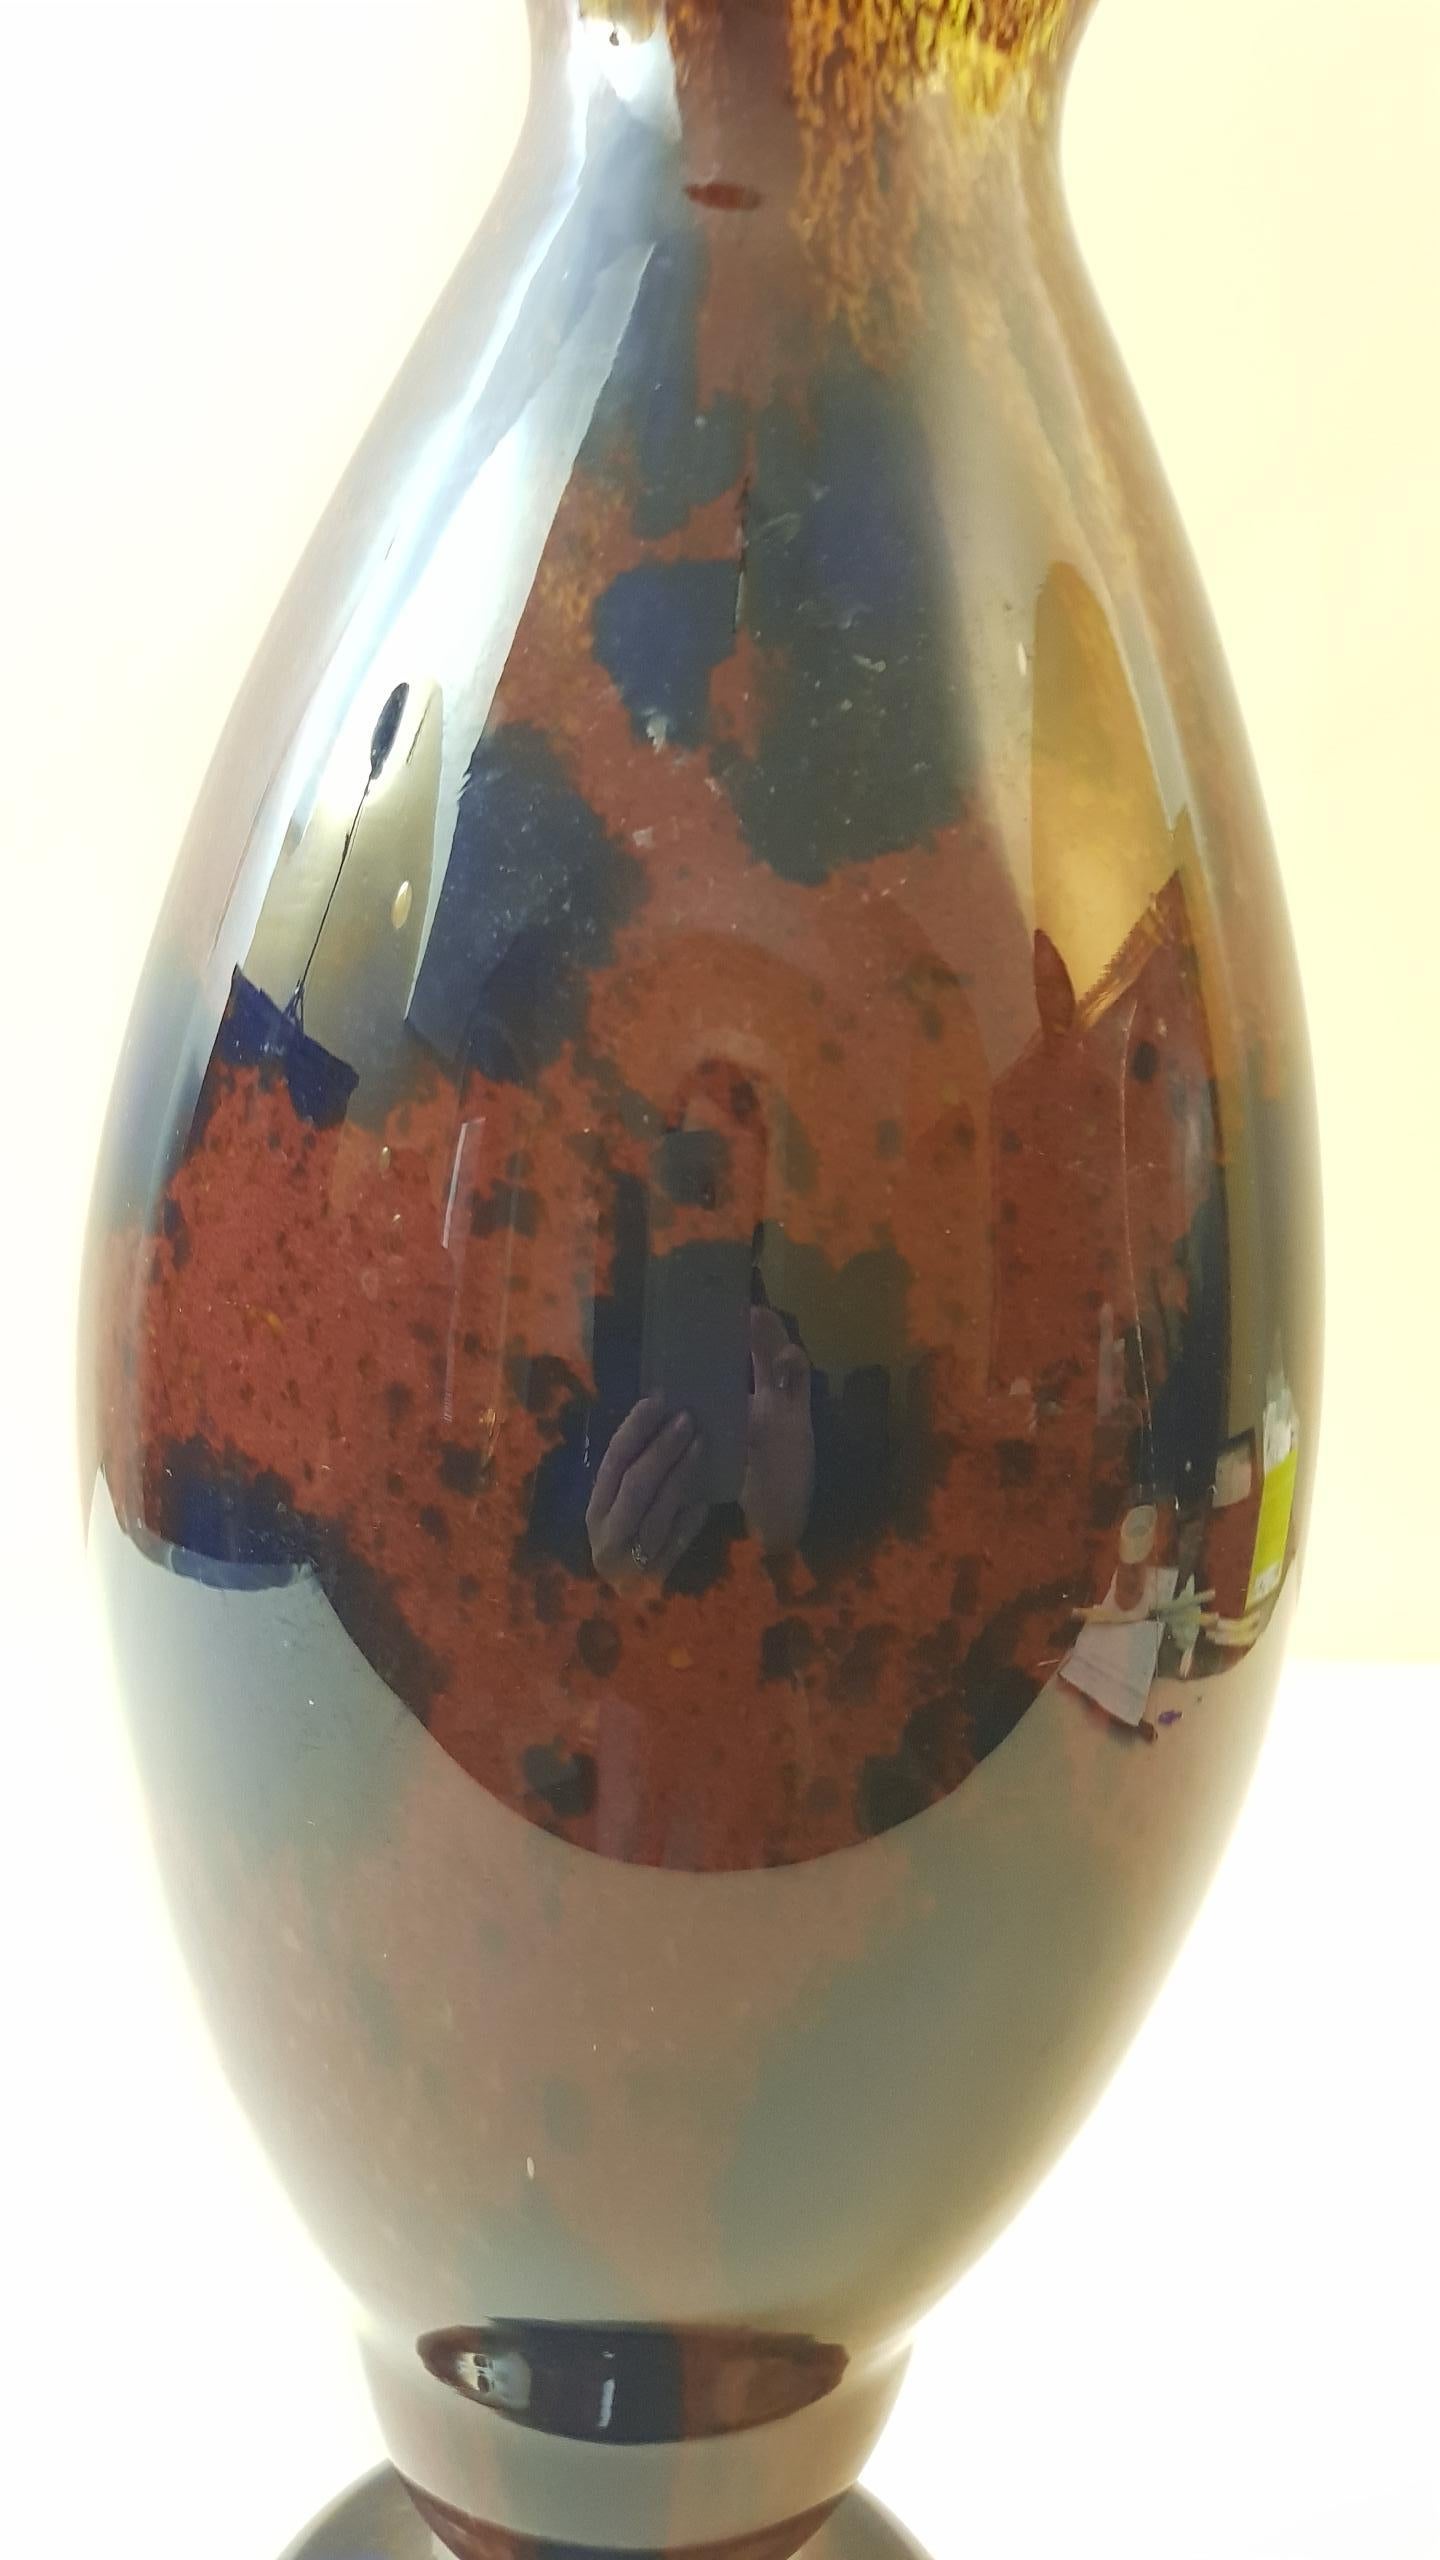 Spectacular  big glass vase of the Jades series of Schneider with polychrome blue, brown and yellow oval shaped pivots on base and flared neck.
Characterized by an imposing size that does not go to the detriment of the beautiful shape and the rich